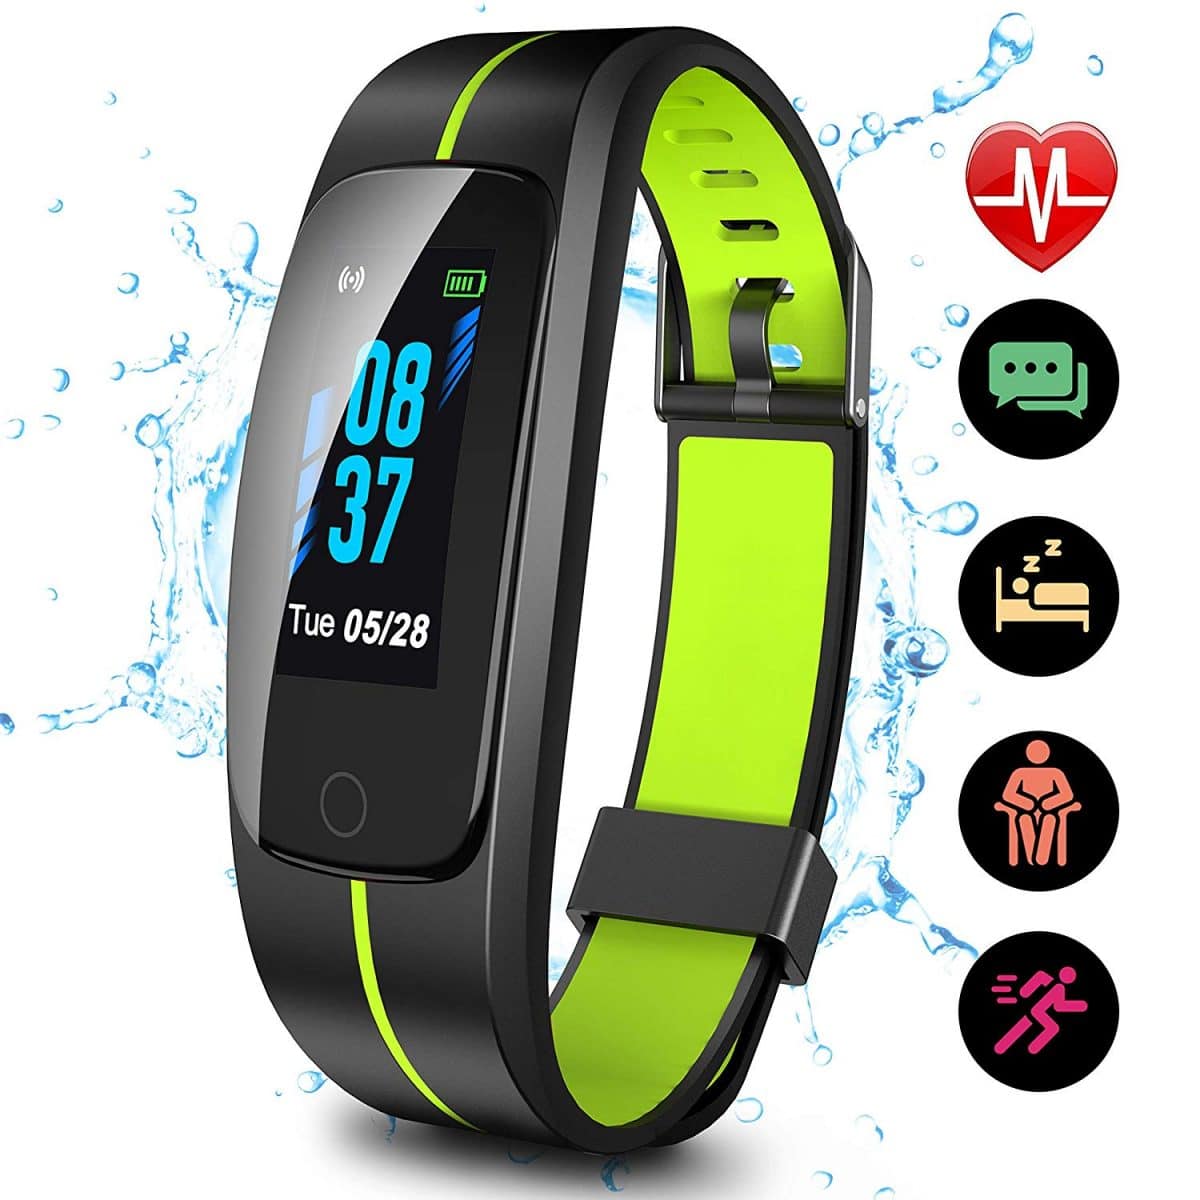 30 Minute Best Fitness Tracker For Spinning 2020 for Weight Loss